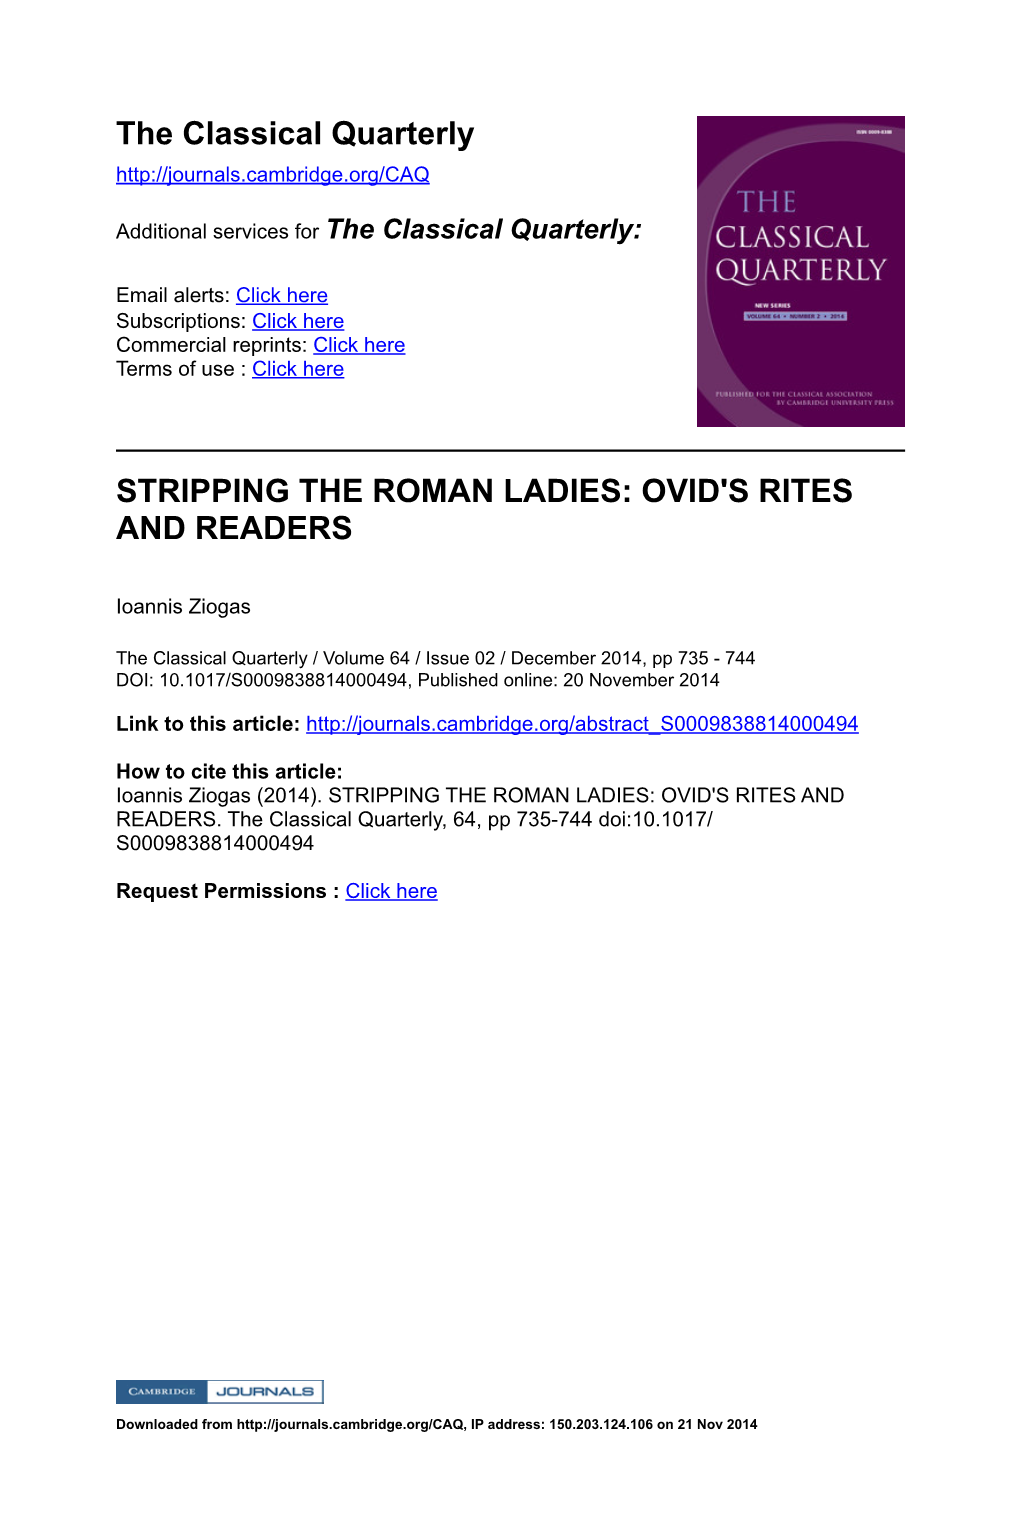 The Classical Quarterly STRIPPING the ROMAN LADIES: OVID's